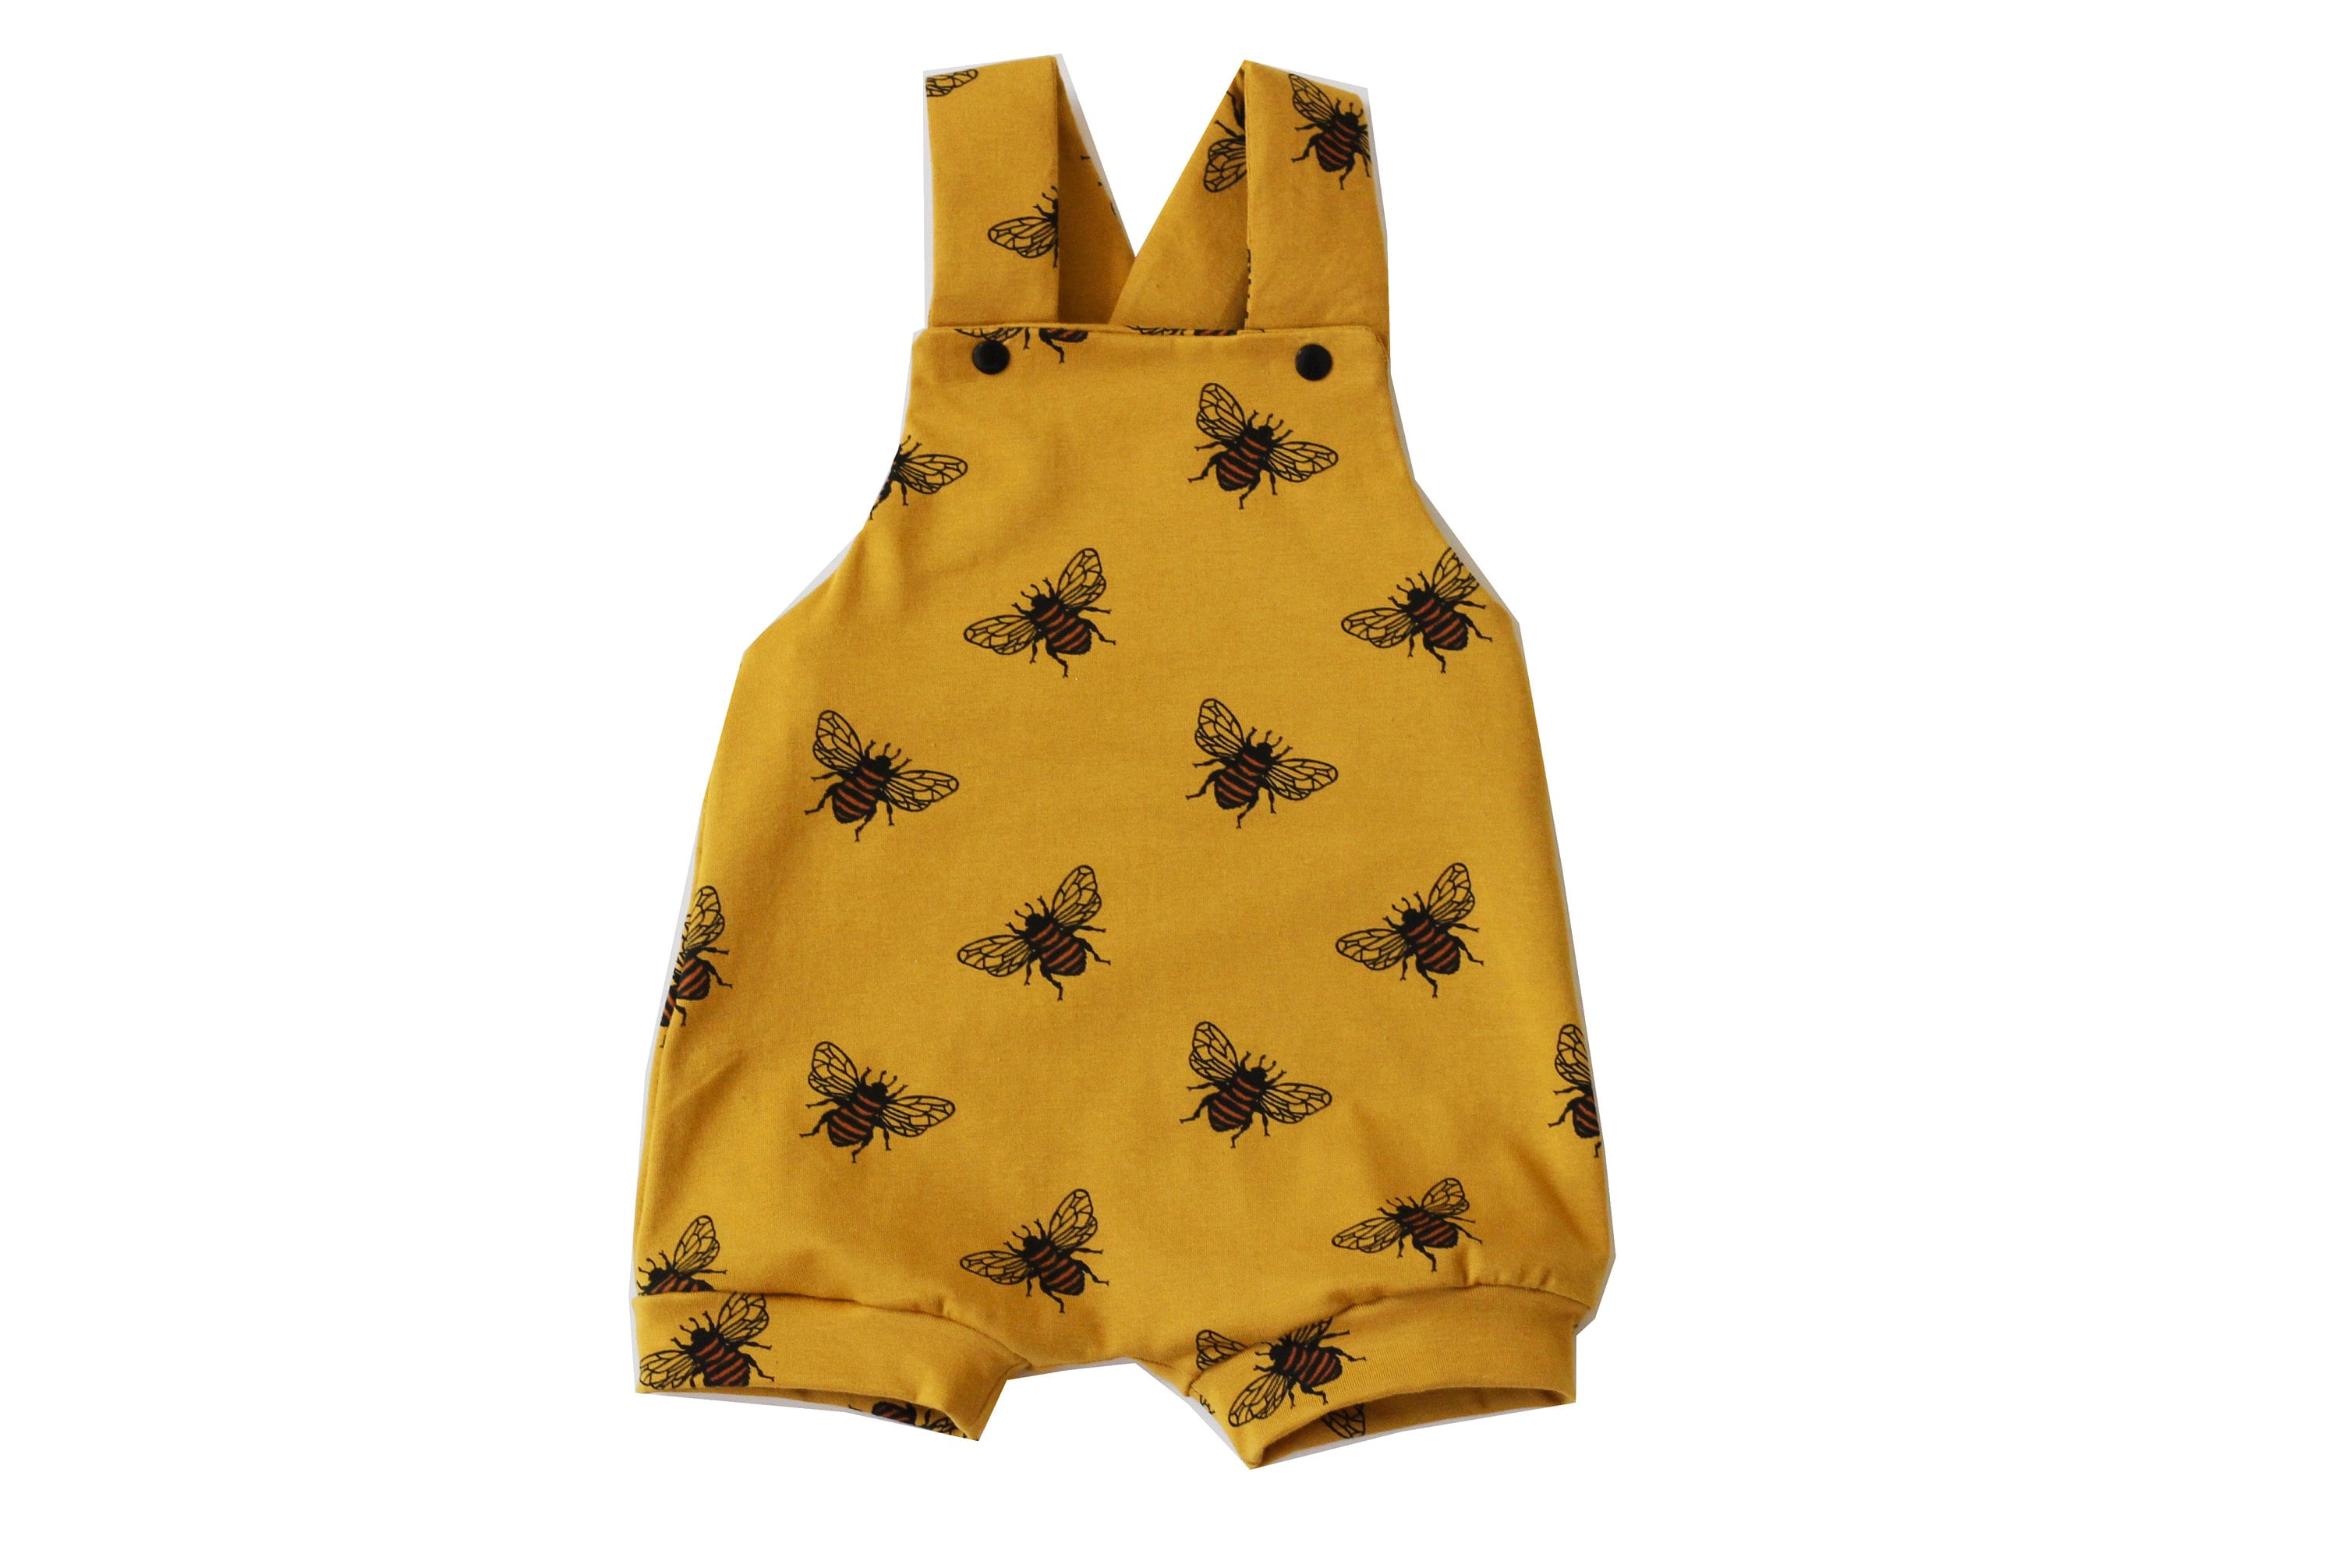 Dungarees, Romper Neutral, Spring Overalls, Toddler Handmade, Bee Shorts, Unisex, Gender Bee Birthday Baby Mustard Etsy Outfit, Summer - Short